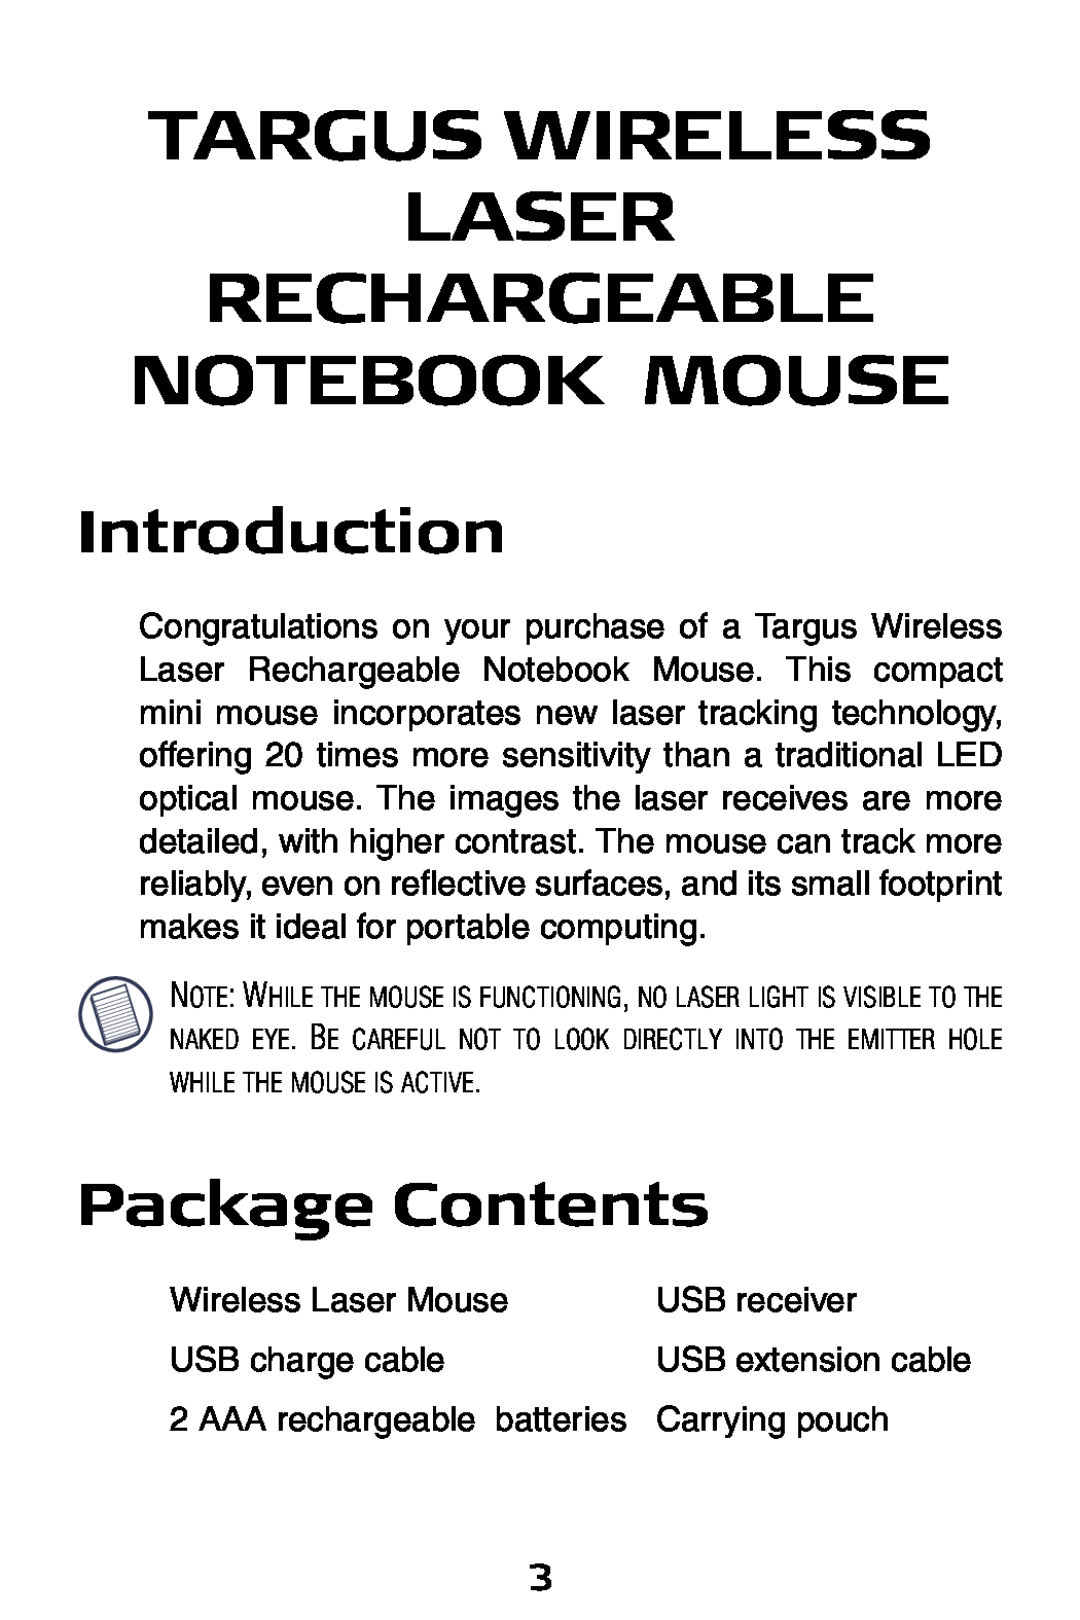 Targus 410-0008-001A manual Targus Wireless Laser Rechargeable Notebook Mouse, Introduction, Package Contents 